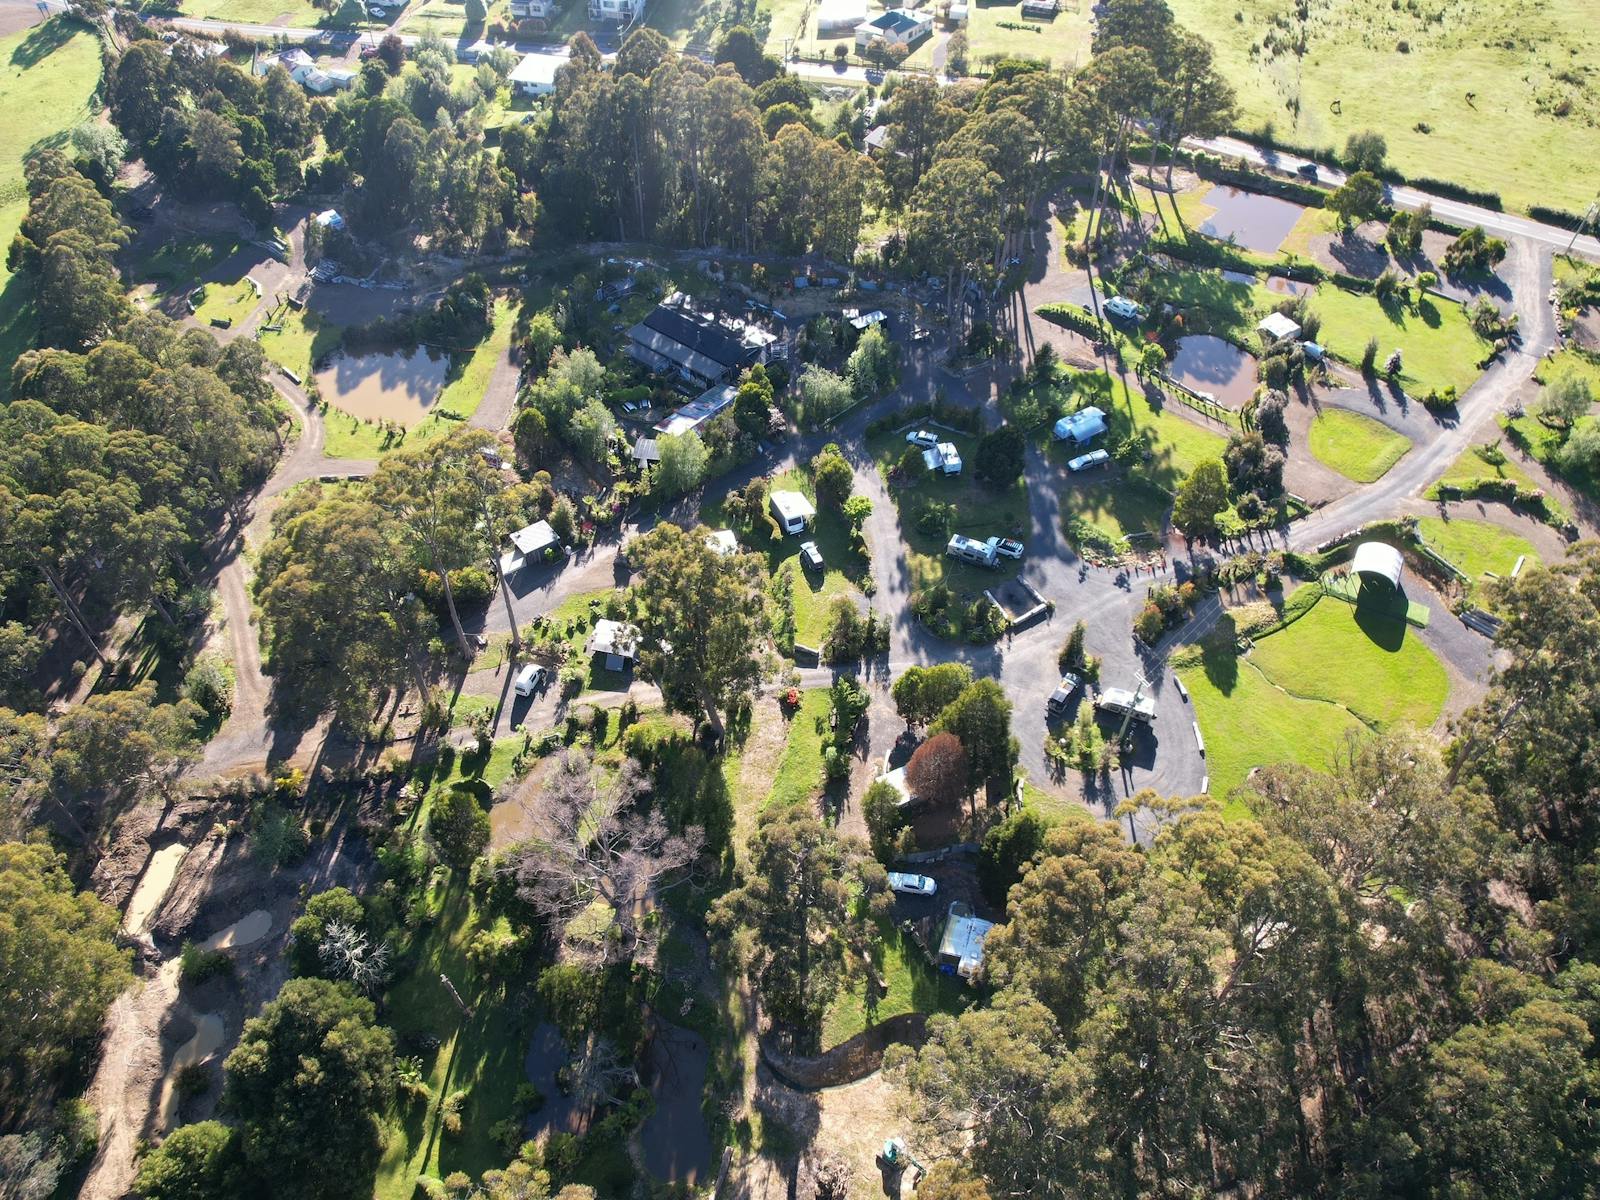 Aerial view of the park